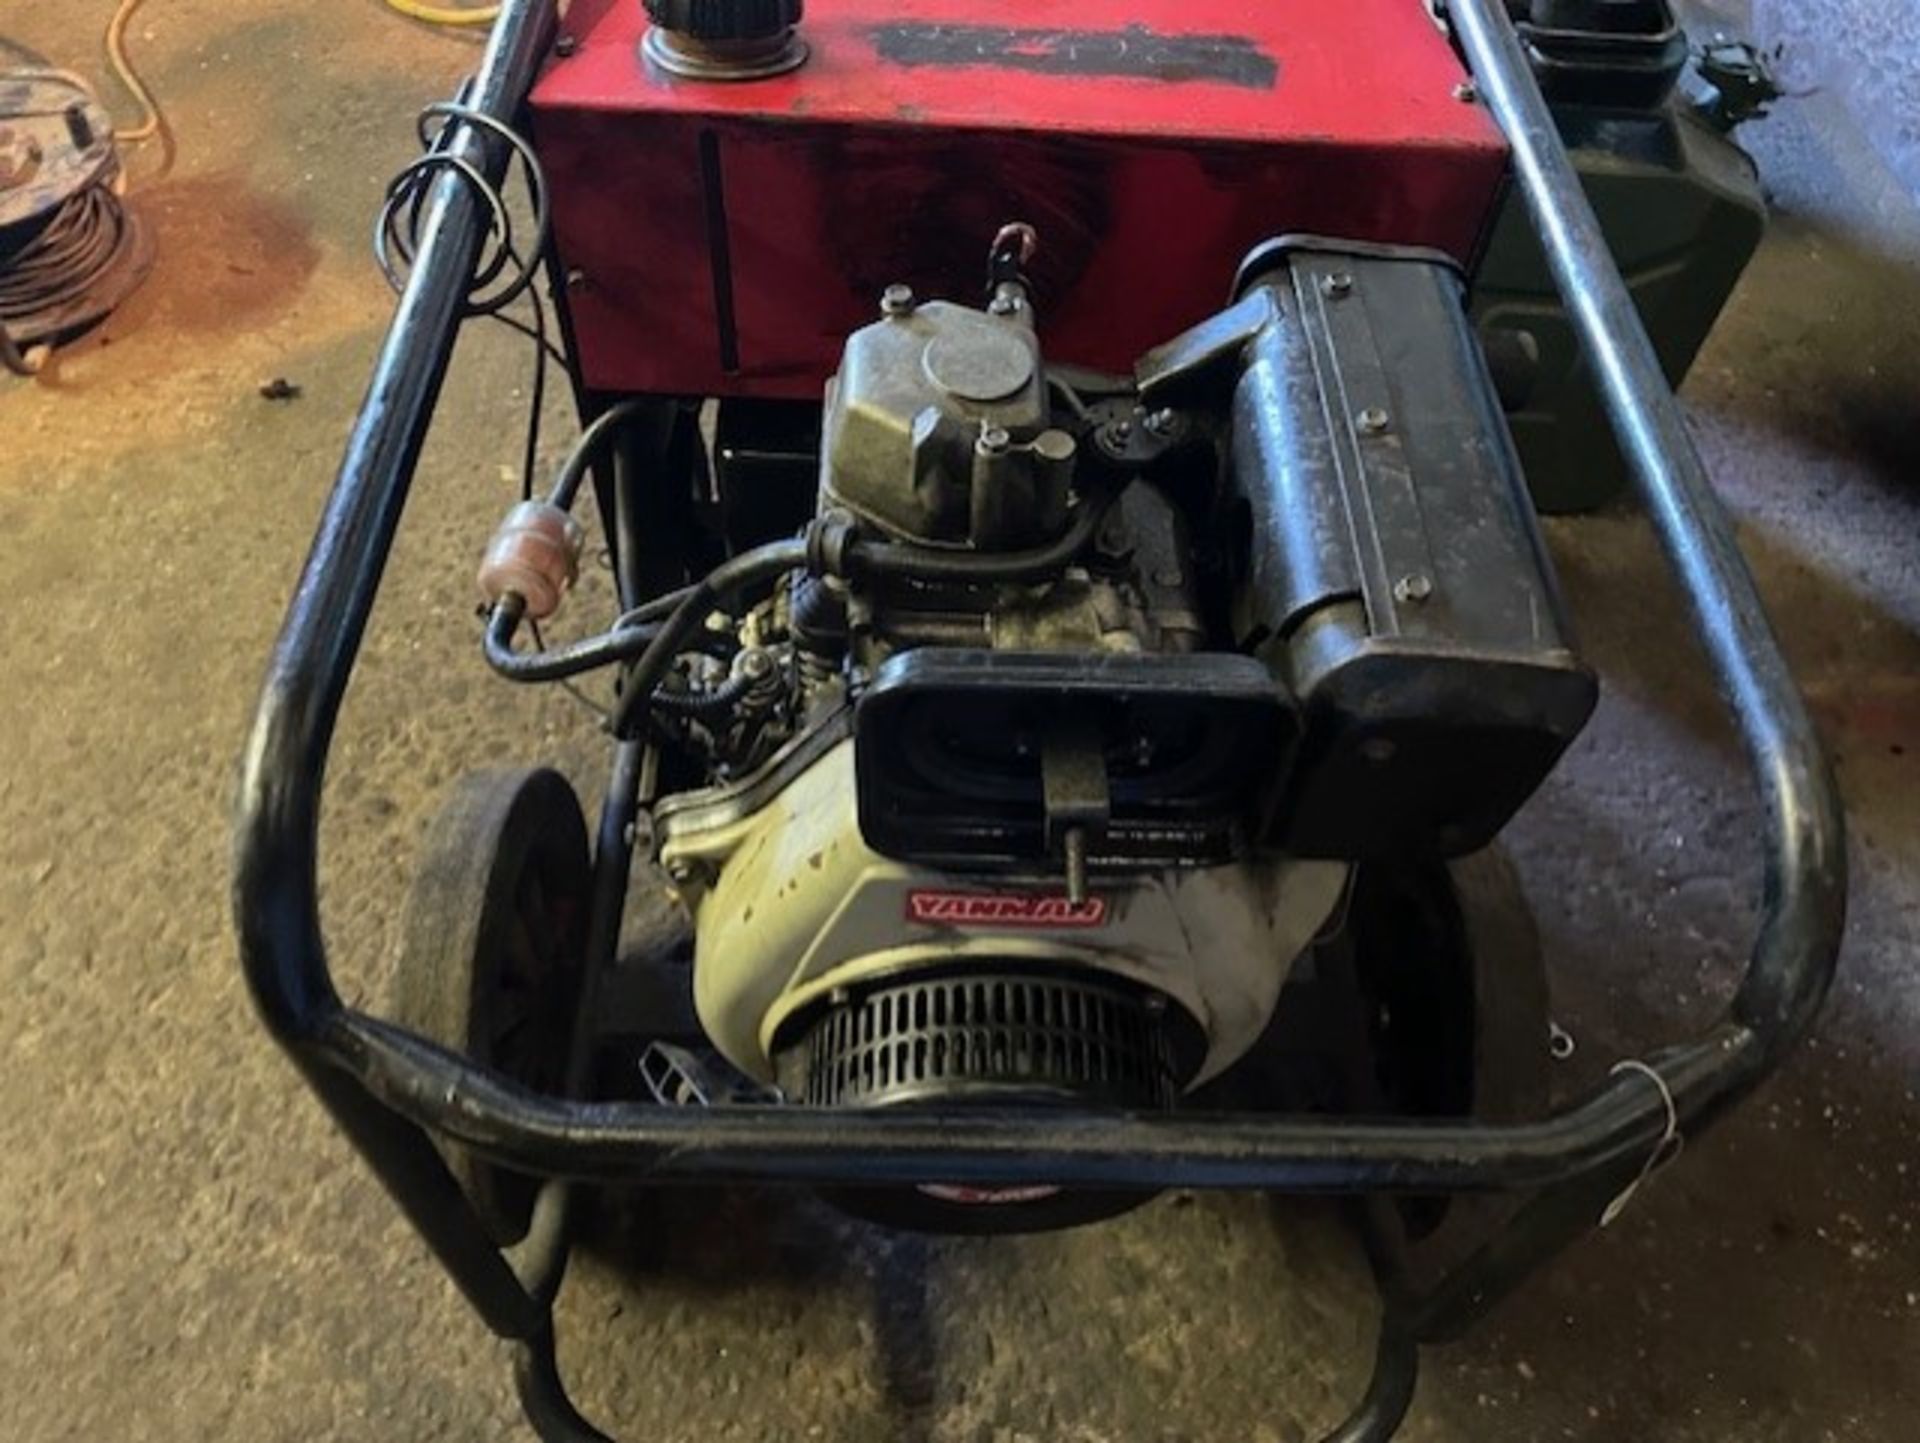 Generator with yanmar engine The engine sounds rough when you turn it over So could be a new - Bild 3 aus 7